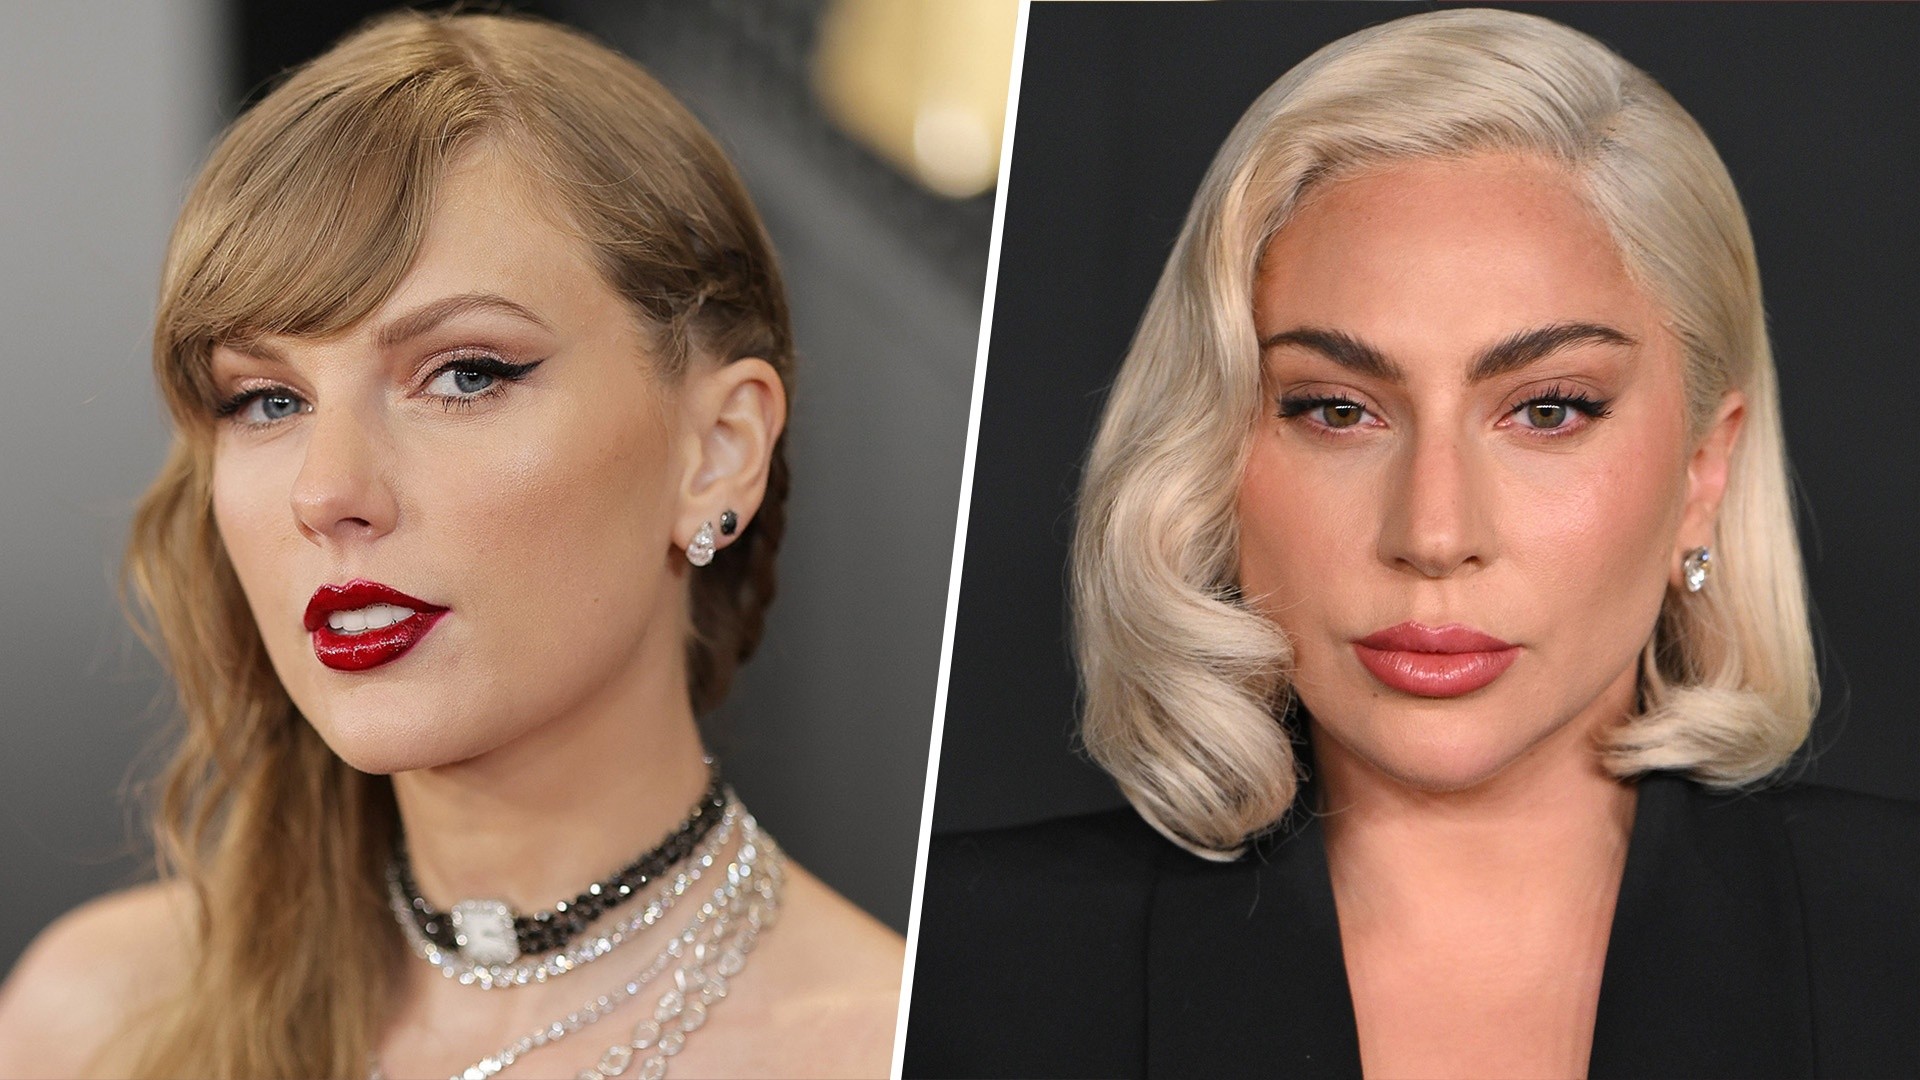 Taylor Swift defends Lady Gaga over comments about her body